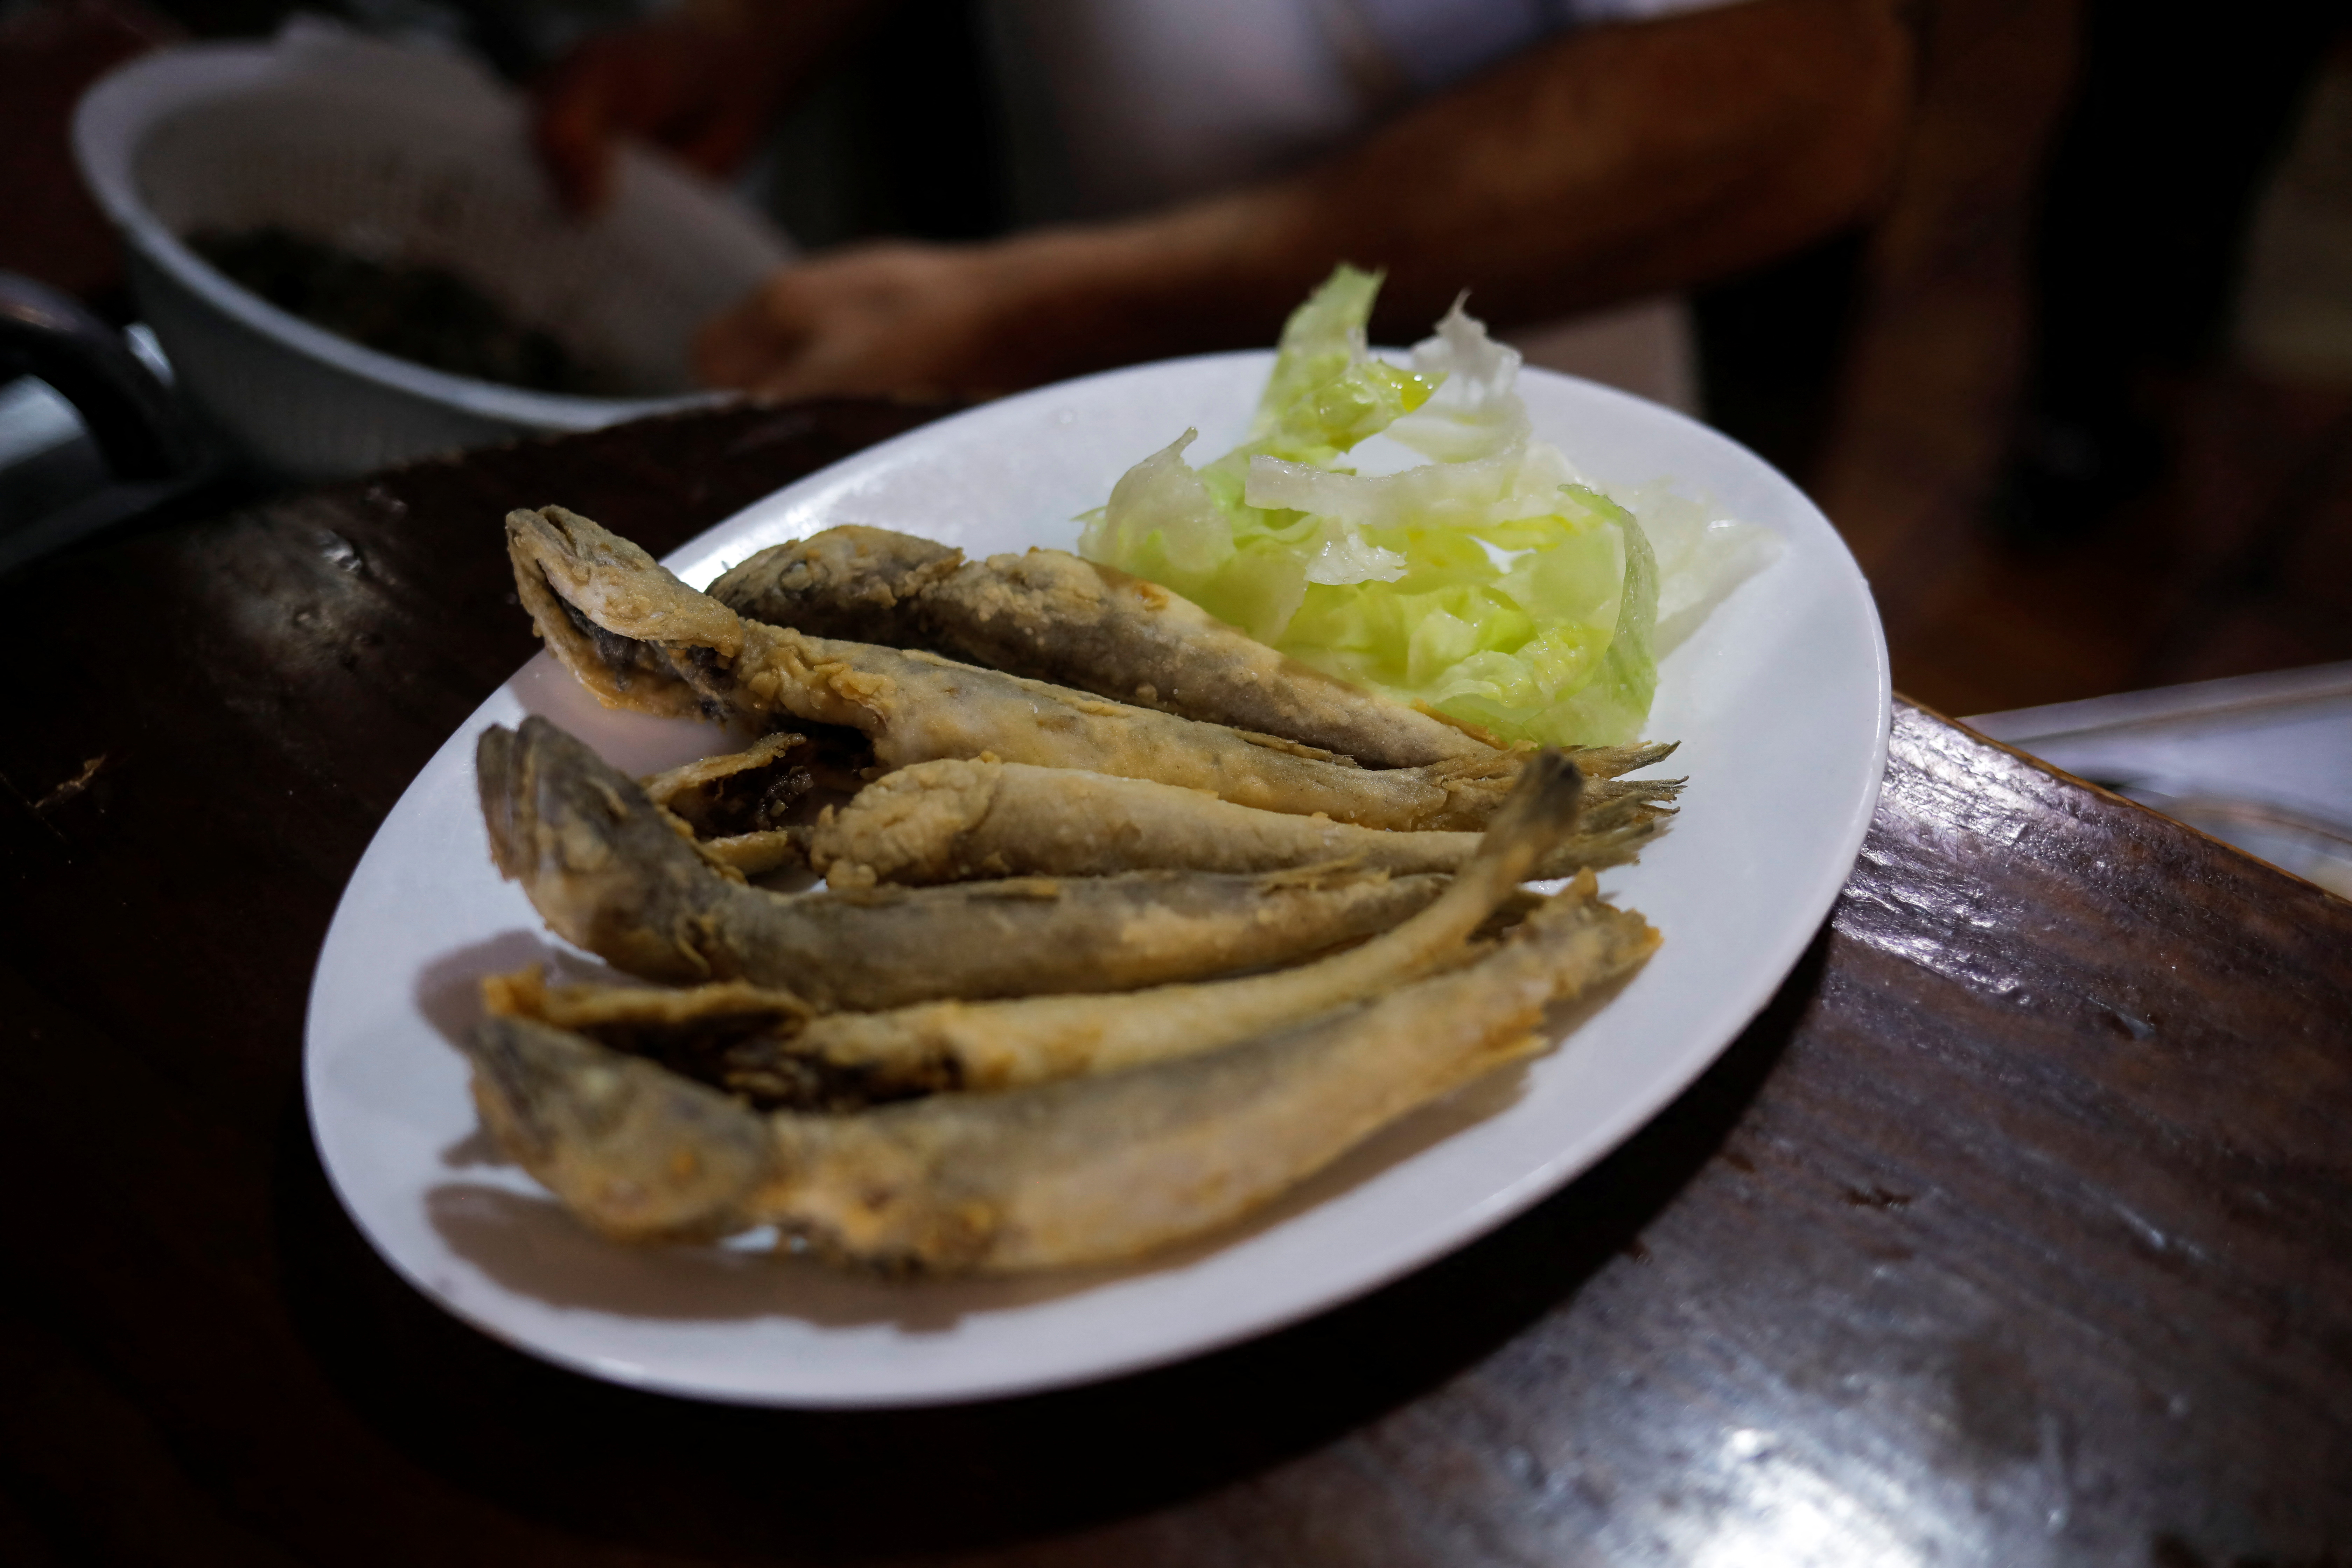 Fish fried cooked with sunflower oil are seen on a plate at Los Cazadores bar in Ronda